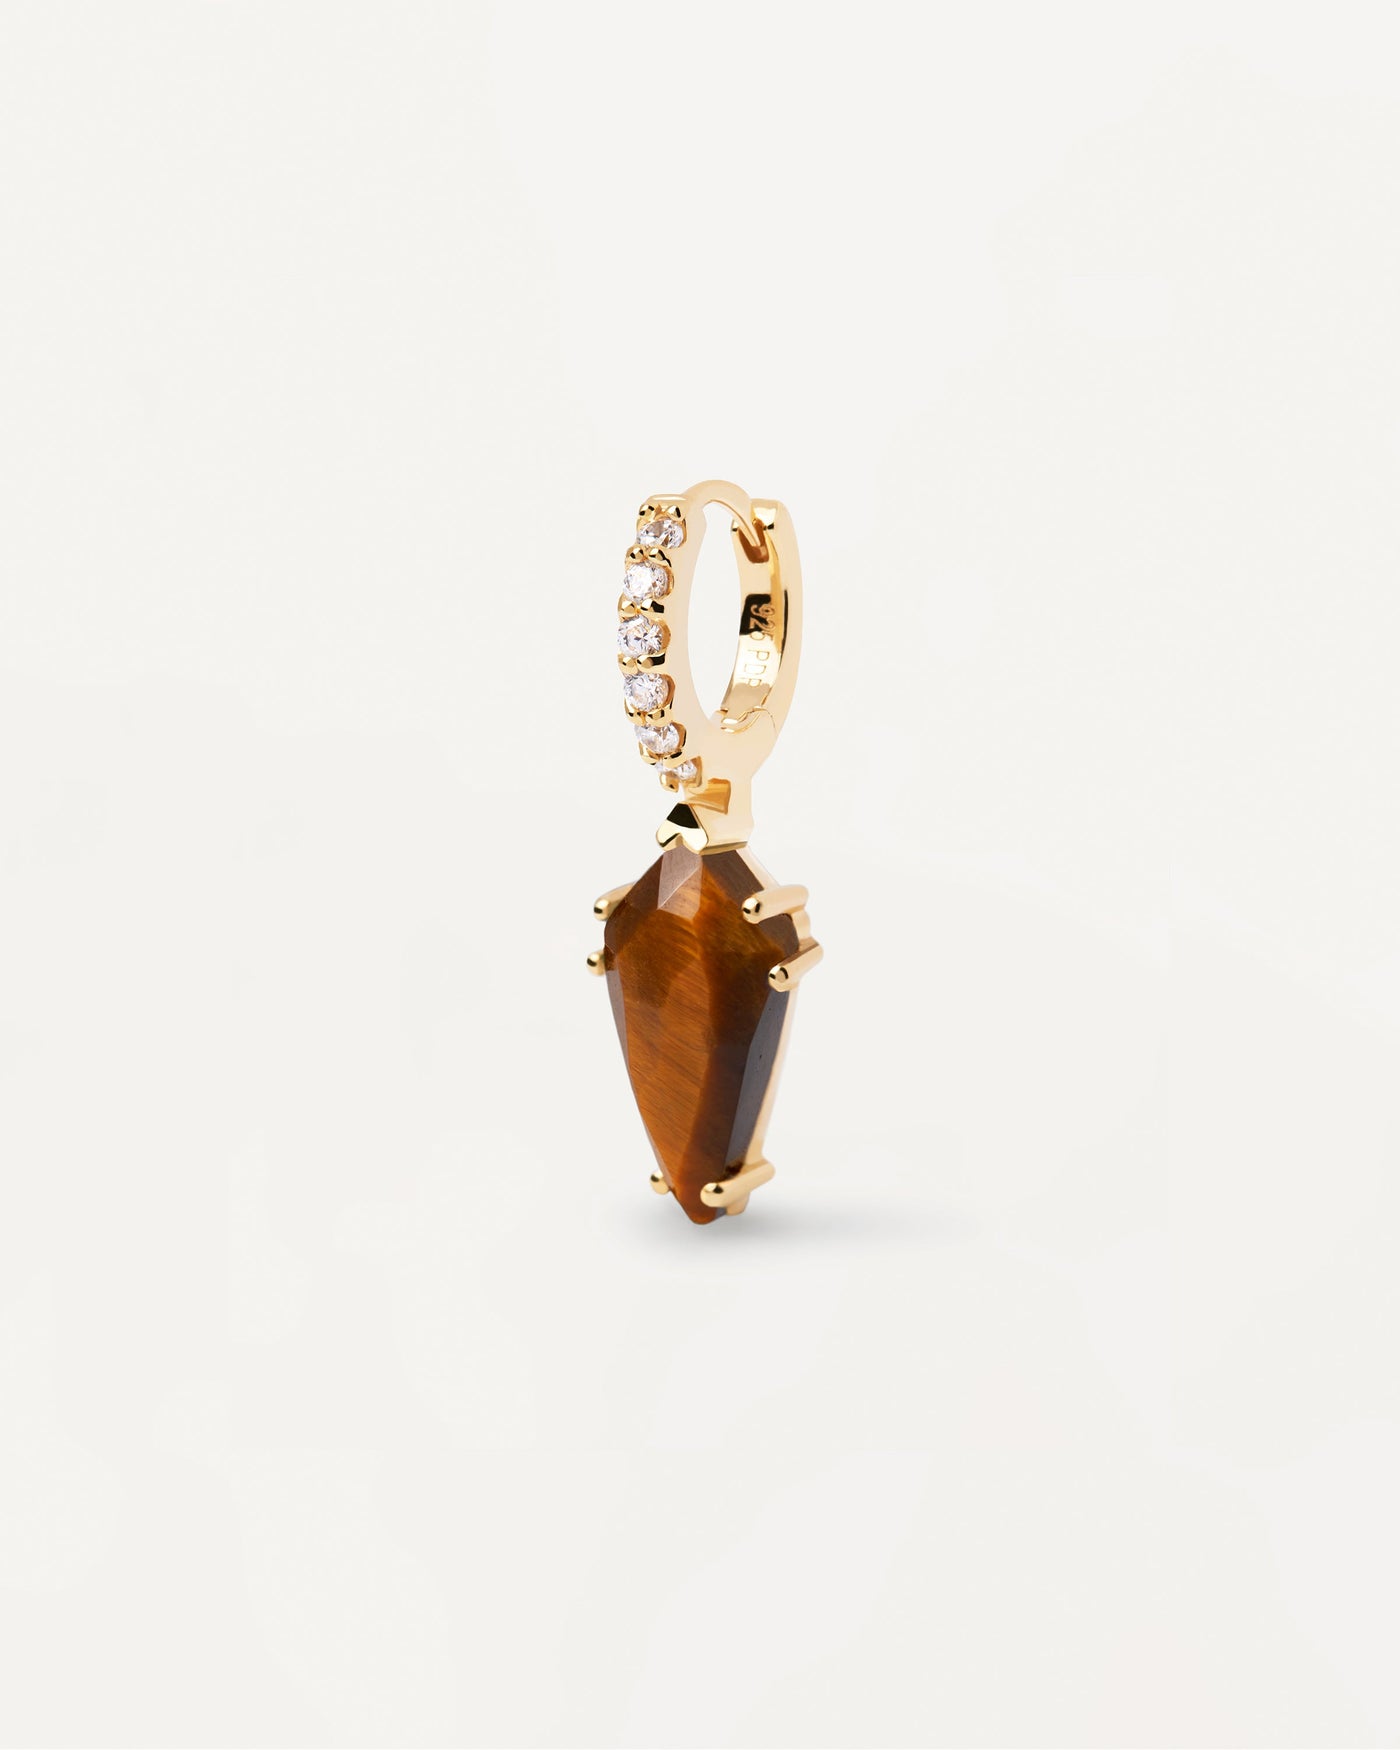 2023 Selection | Naoki Tiger Eye Single Earring. Gold-plated hoop ear piercing with white zirconia and brown pointed gemstone pendant. Get the latest arrival from PDPAOLA. Place your order safely and get this Best Seller. Free Shipping.